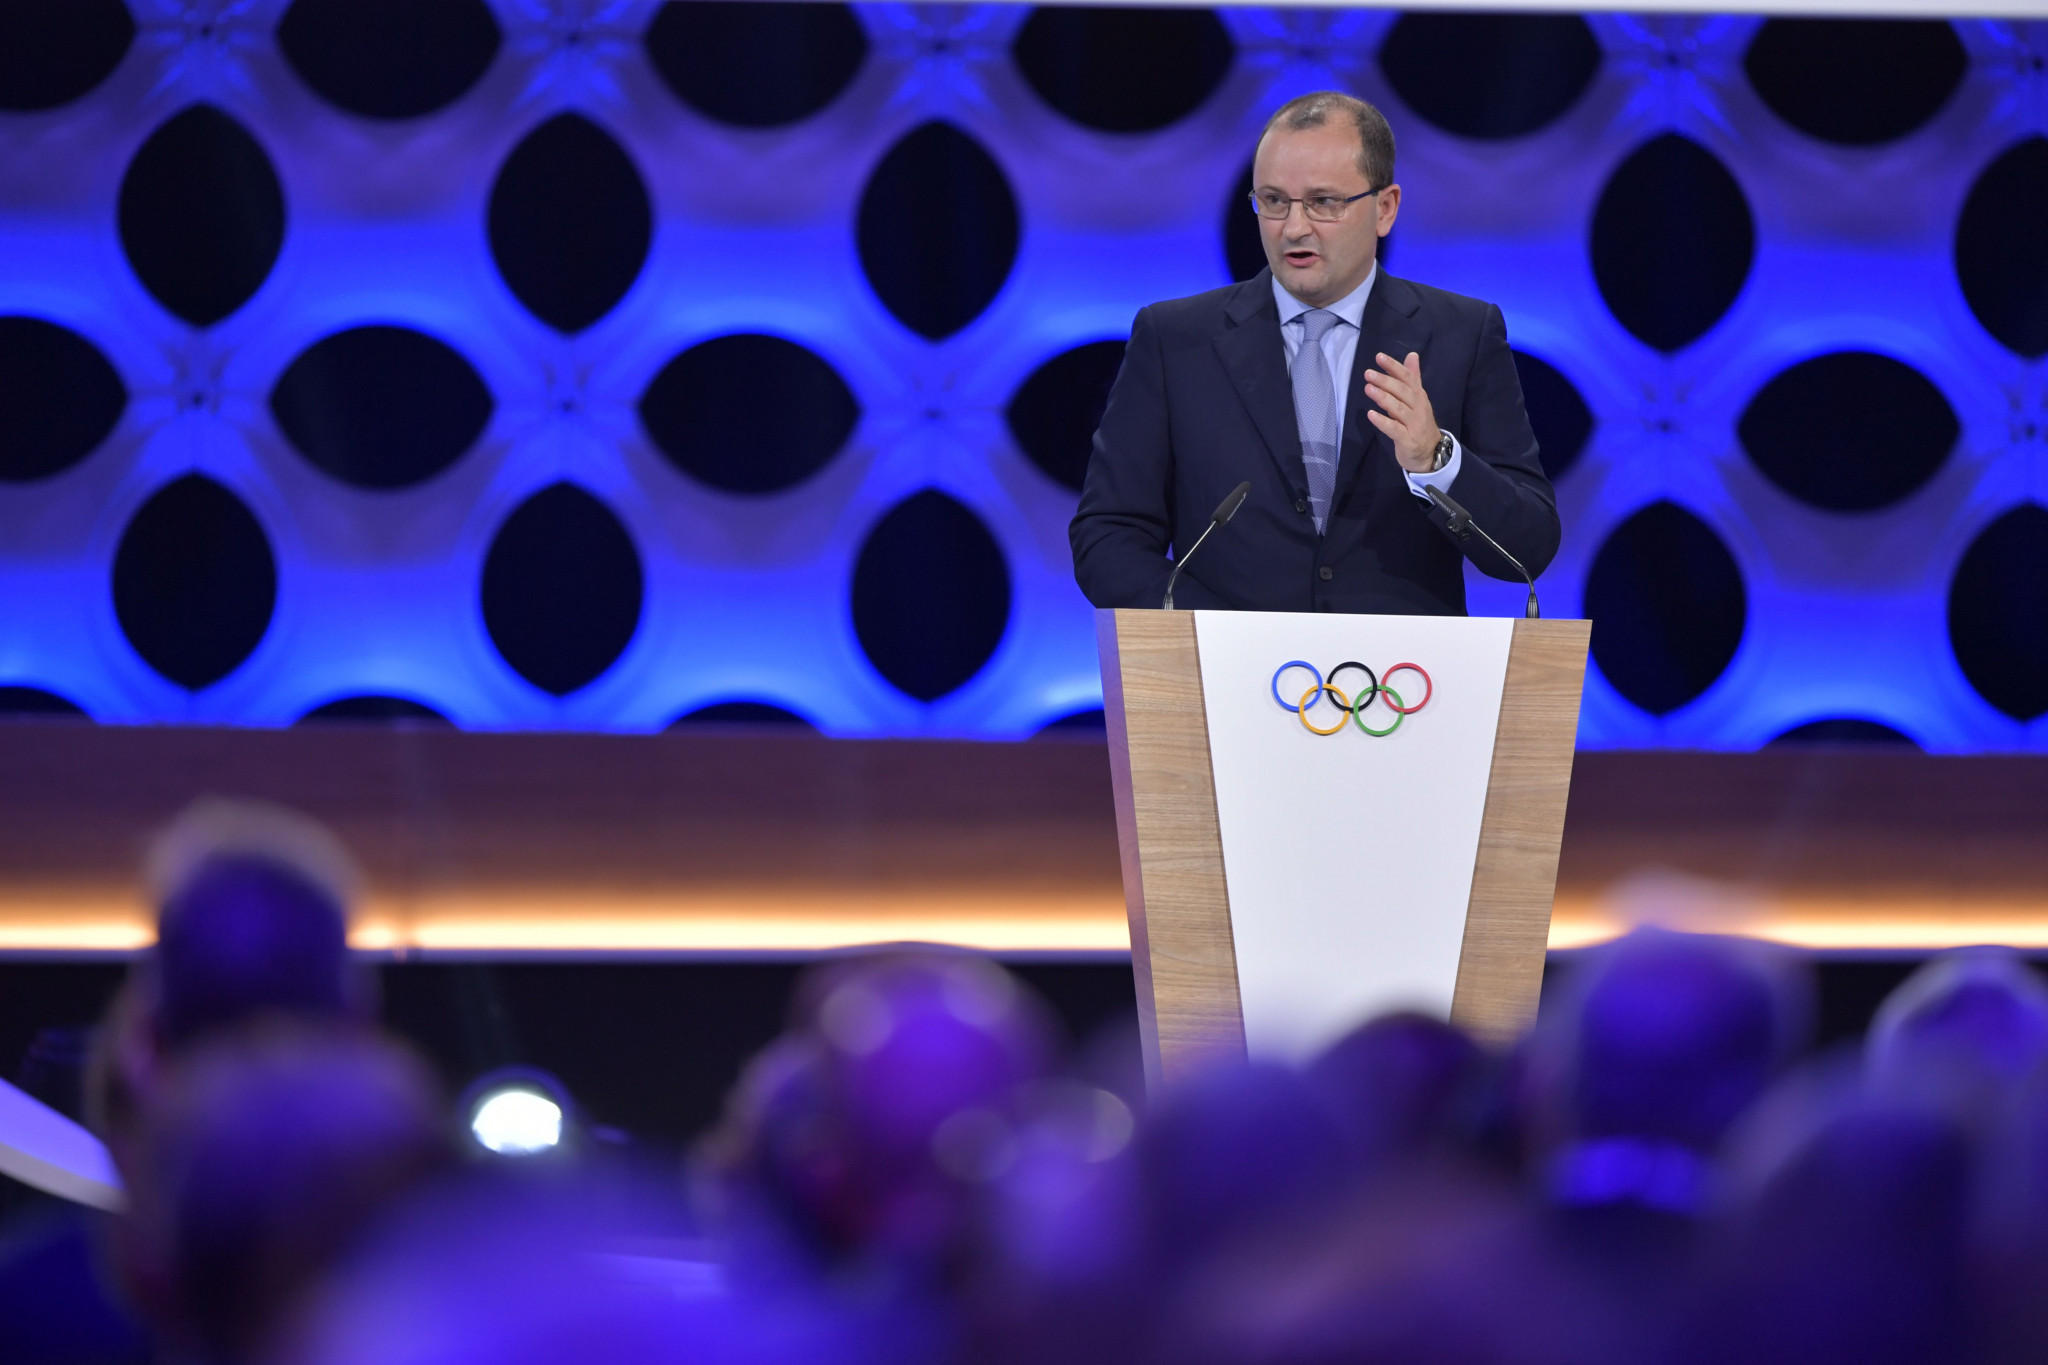 Patrick Baumann is chairman of the Los Angeles 2028 panel ©Getty Images